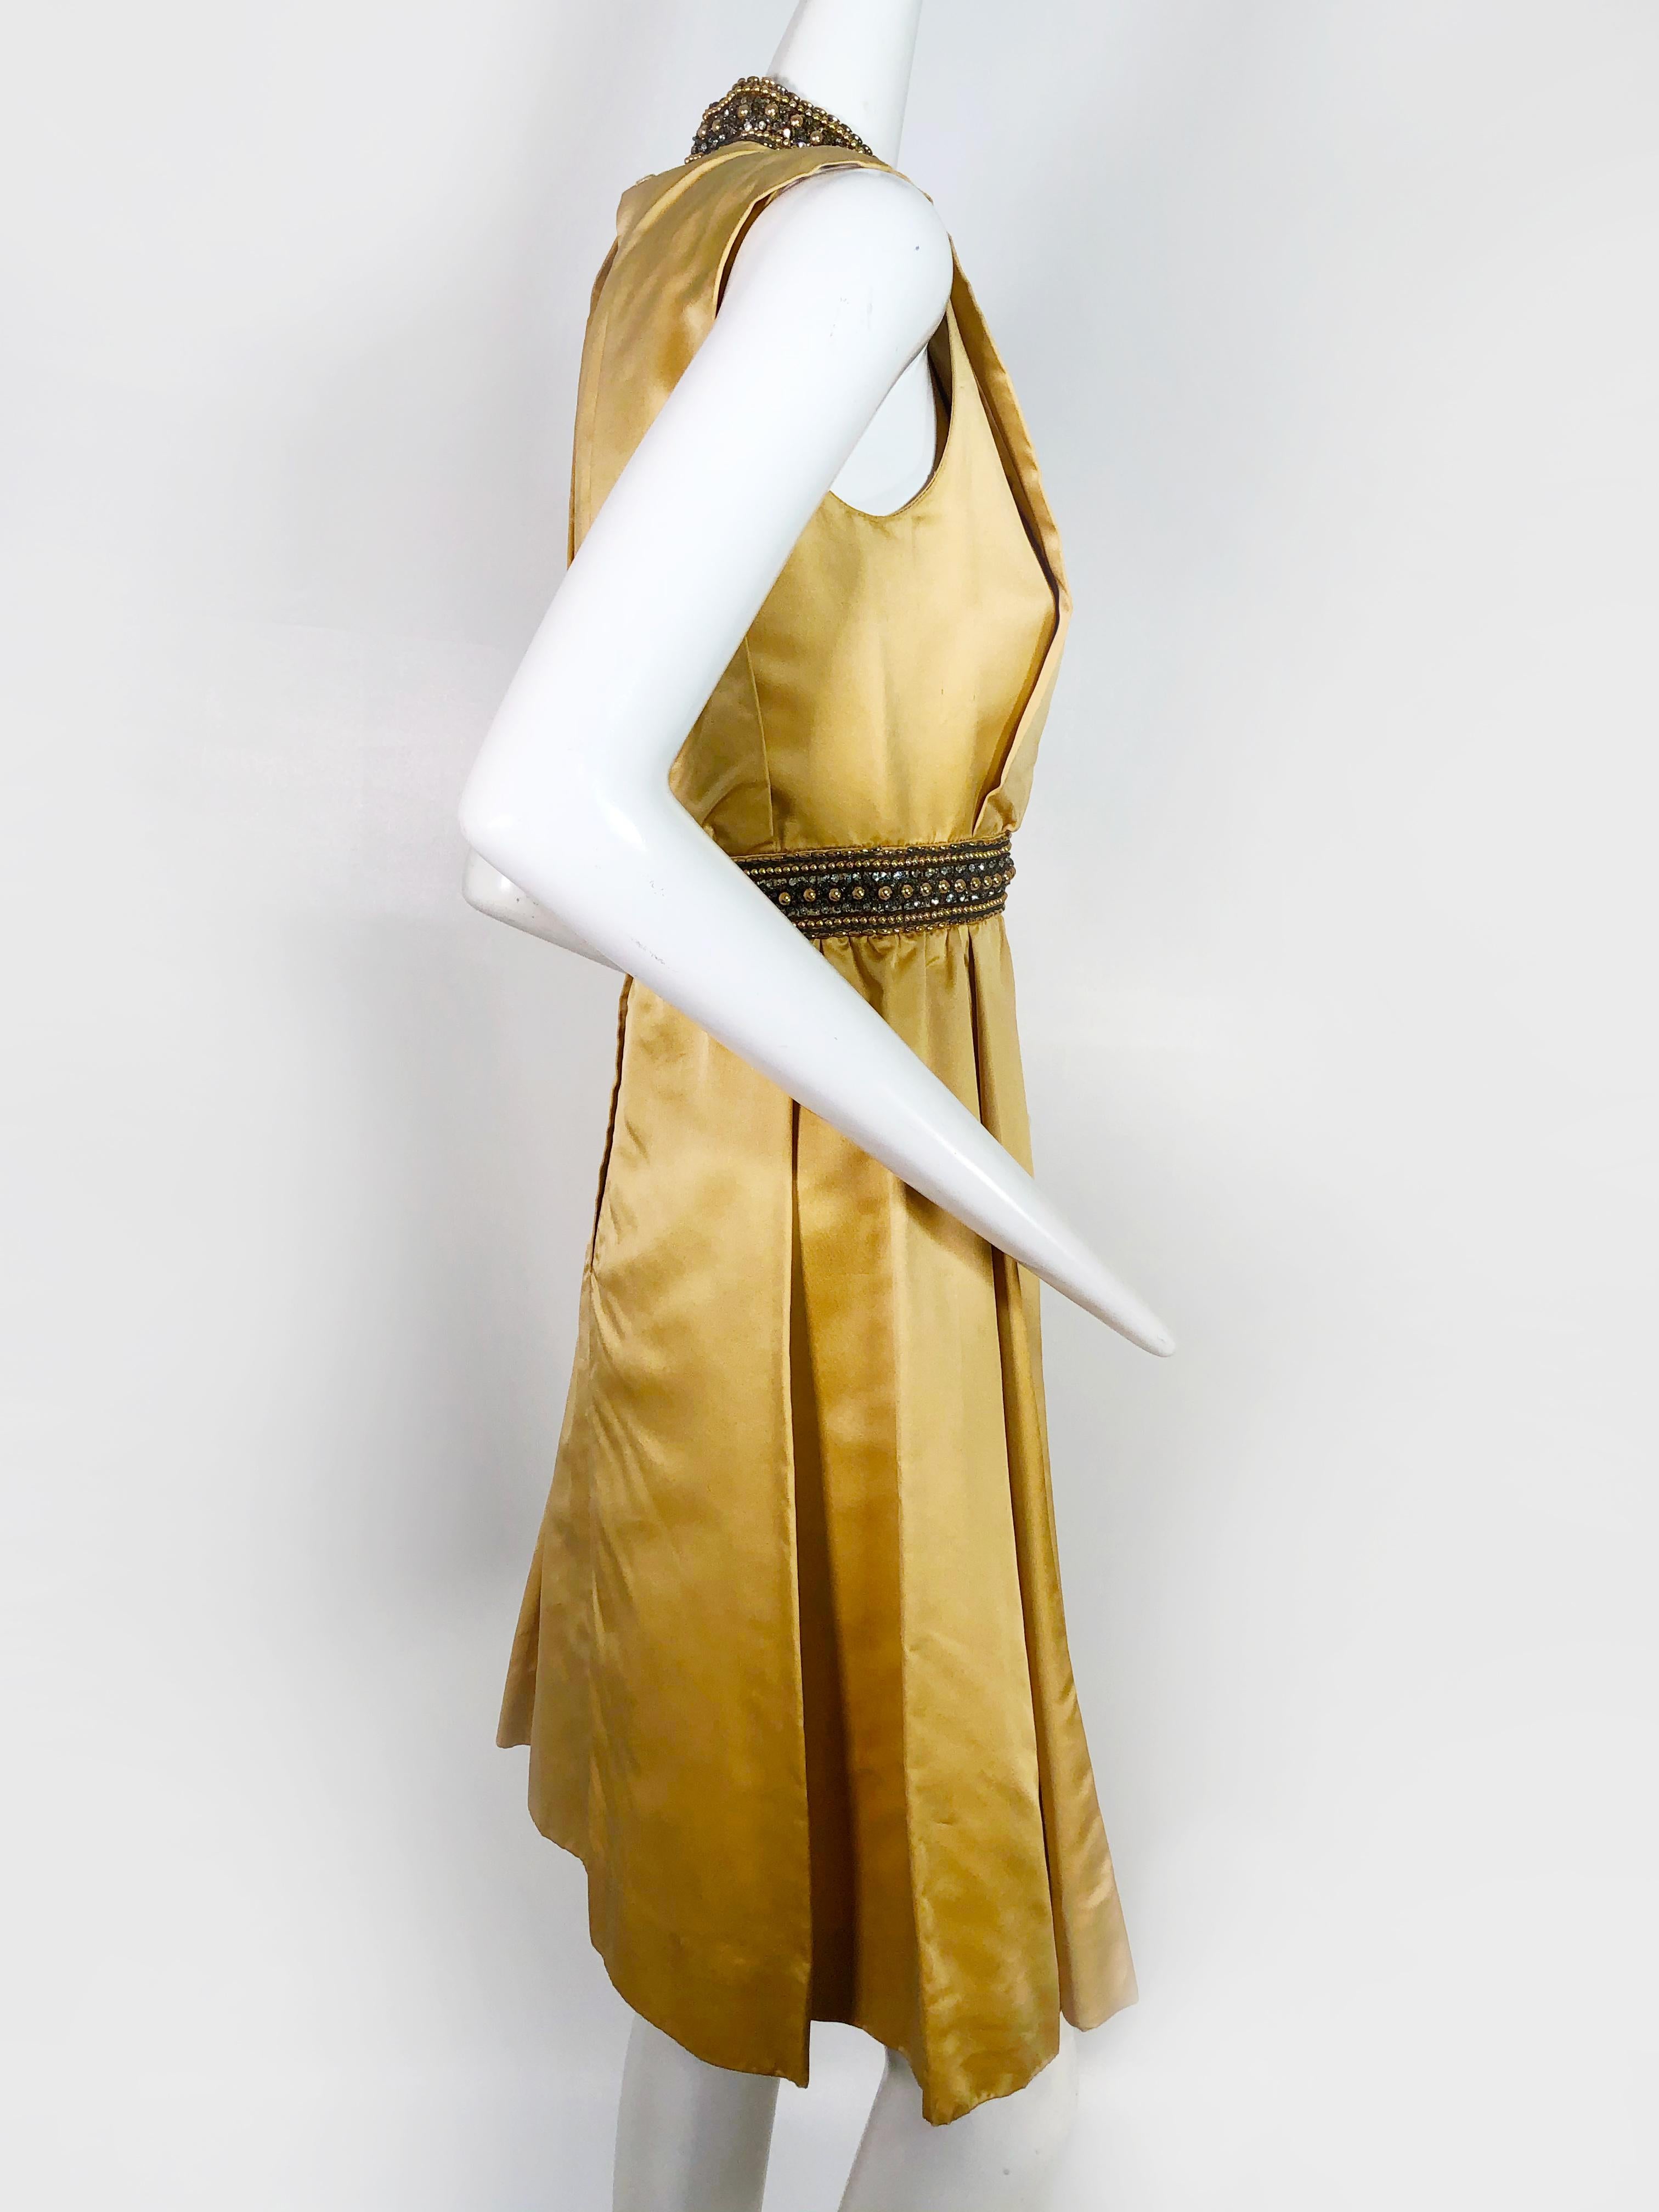 Women's 1960s Chester Weinberg Gold Lame and Pastel Brocade Evening Coat Ensemble For Sale